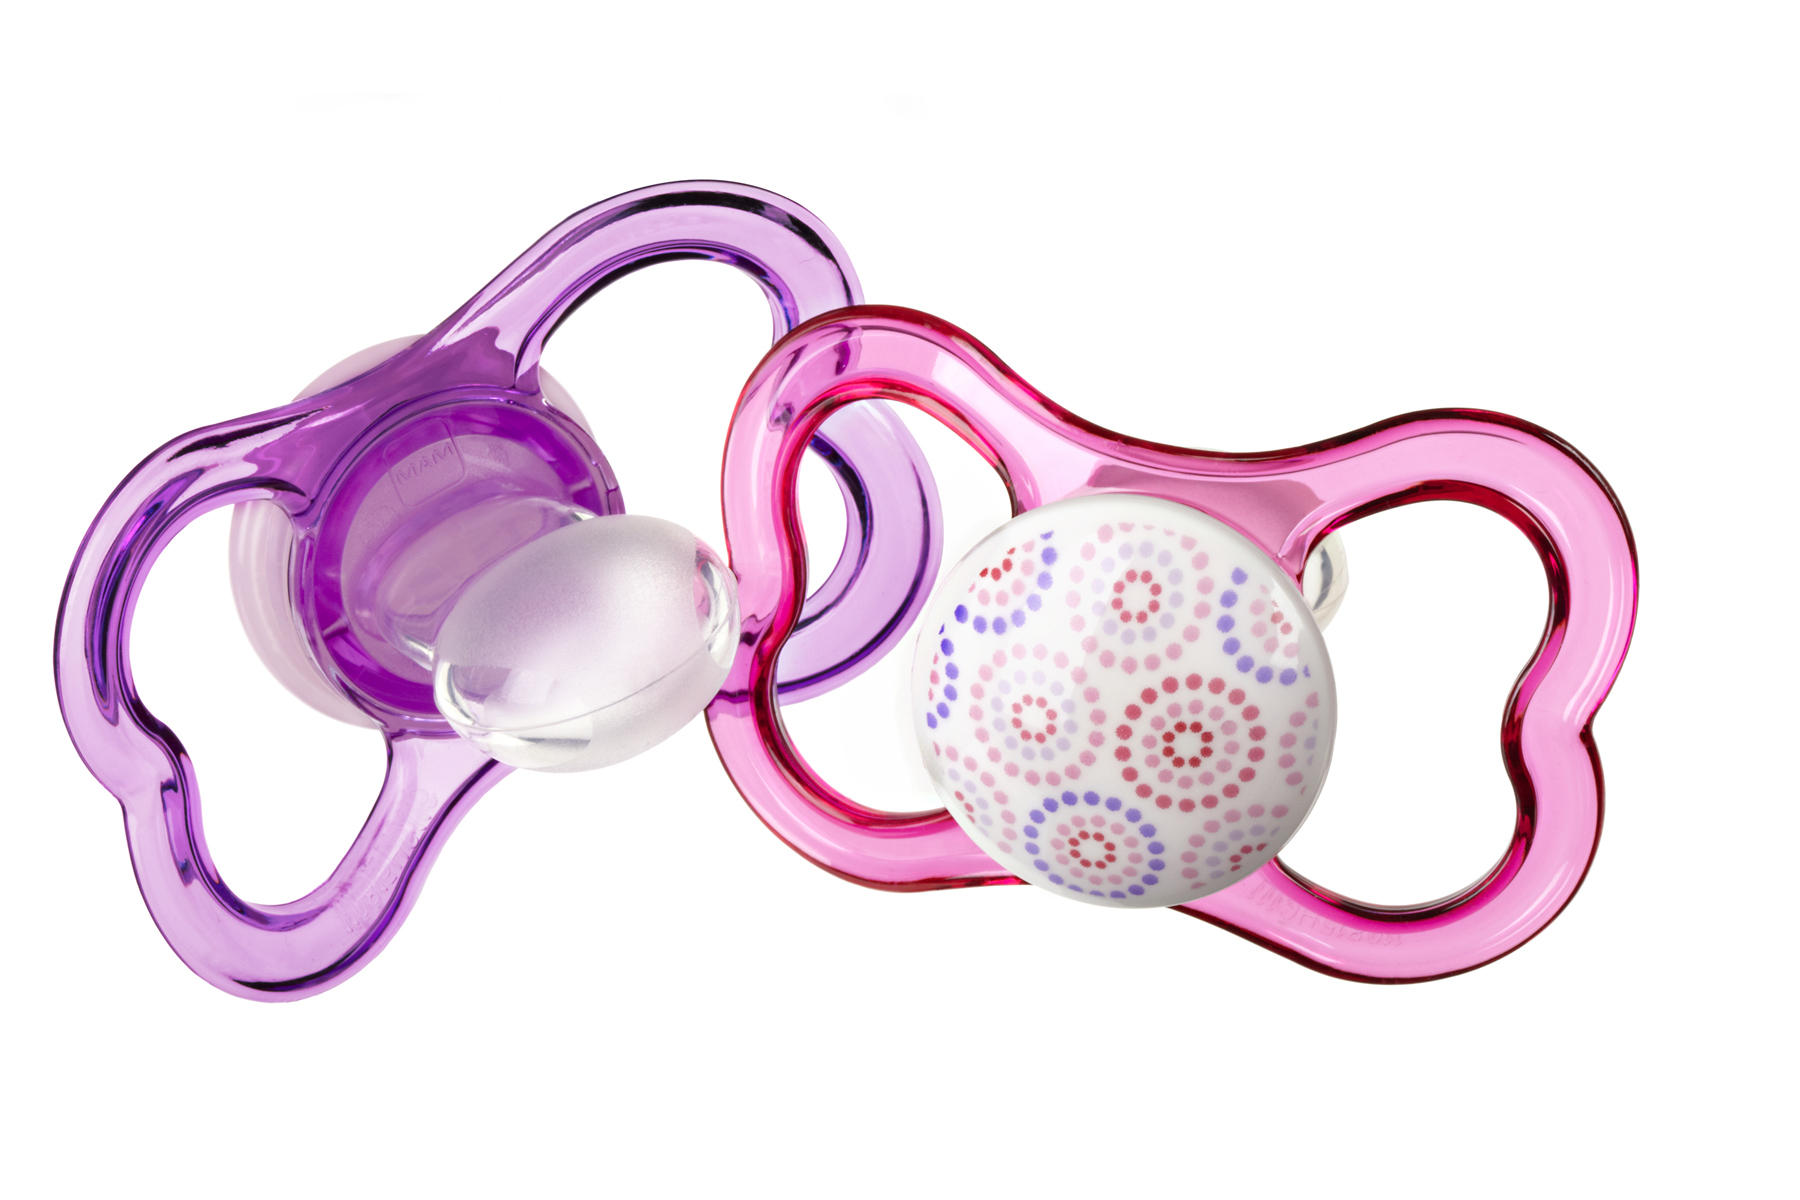 product photo of pacifiers by Brian Kaldorf